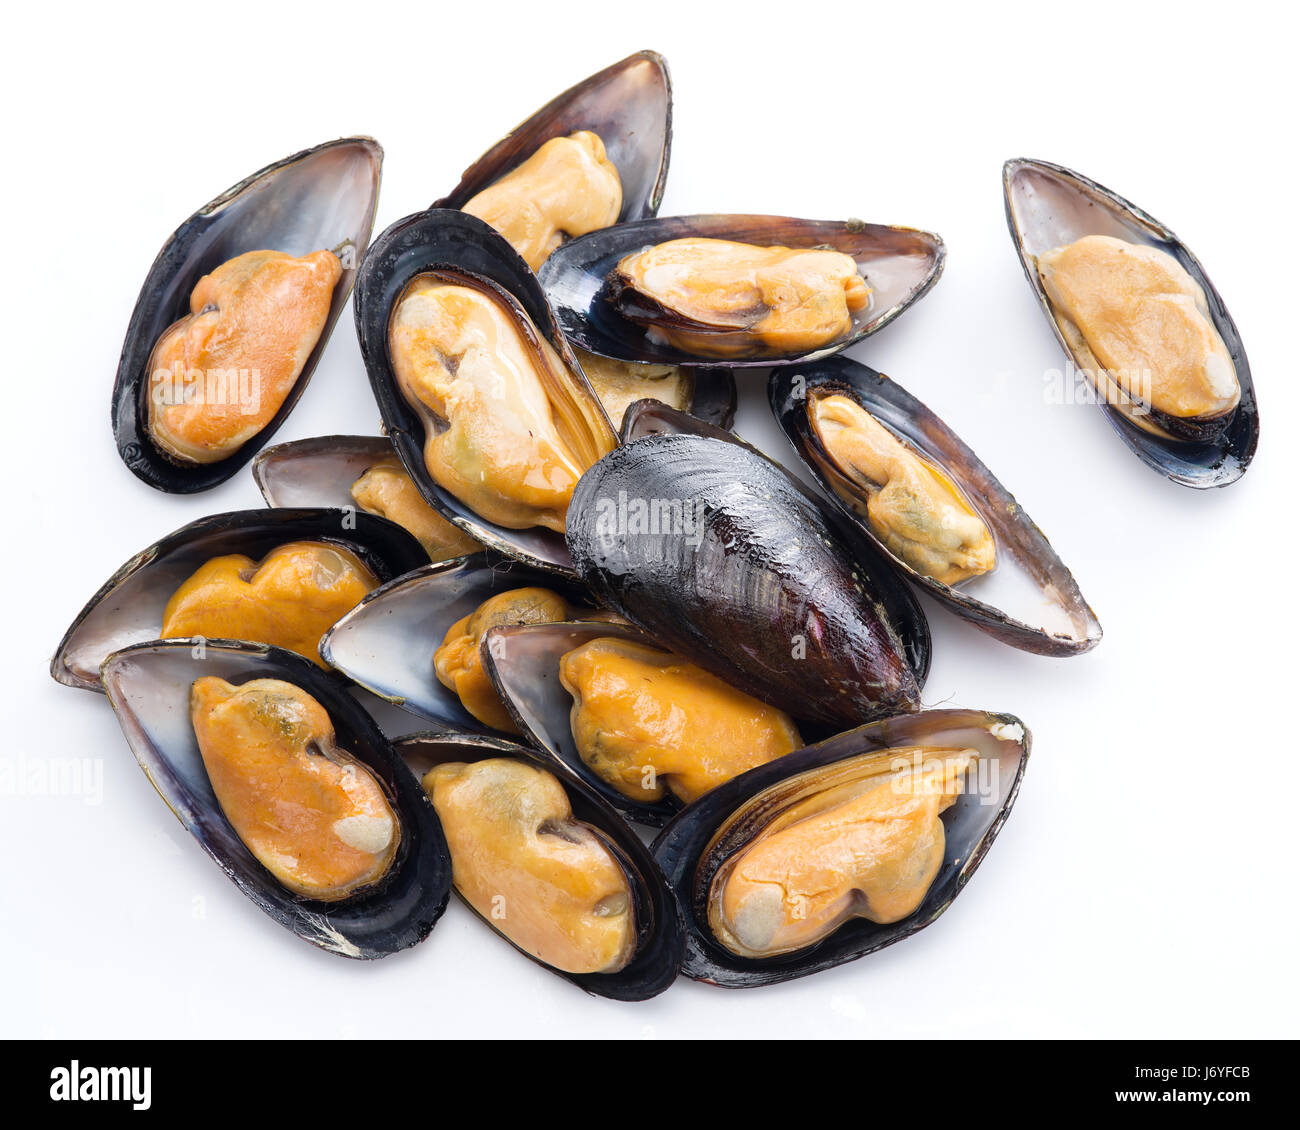 Boiled mussels on a white background. Stock Photo